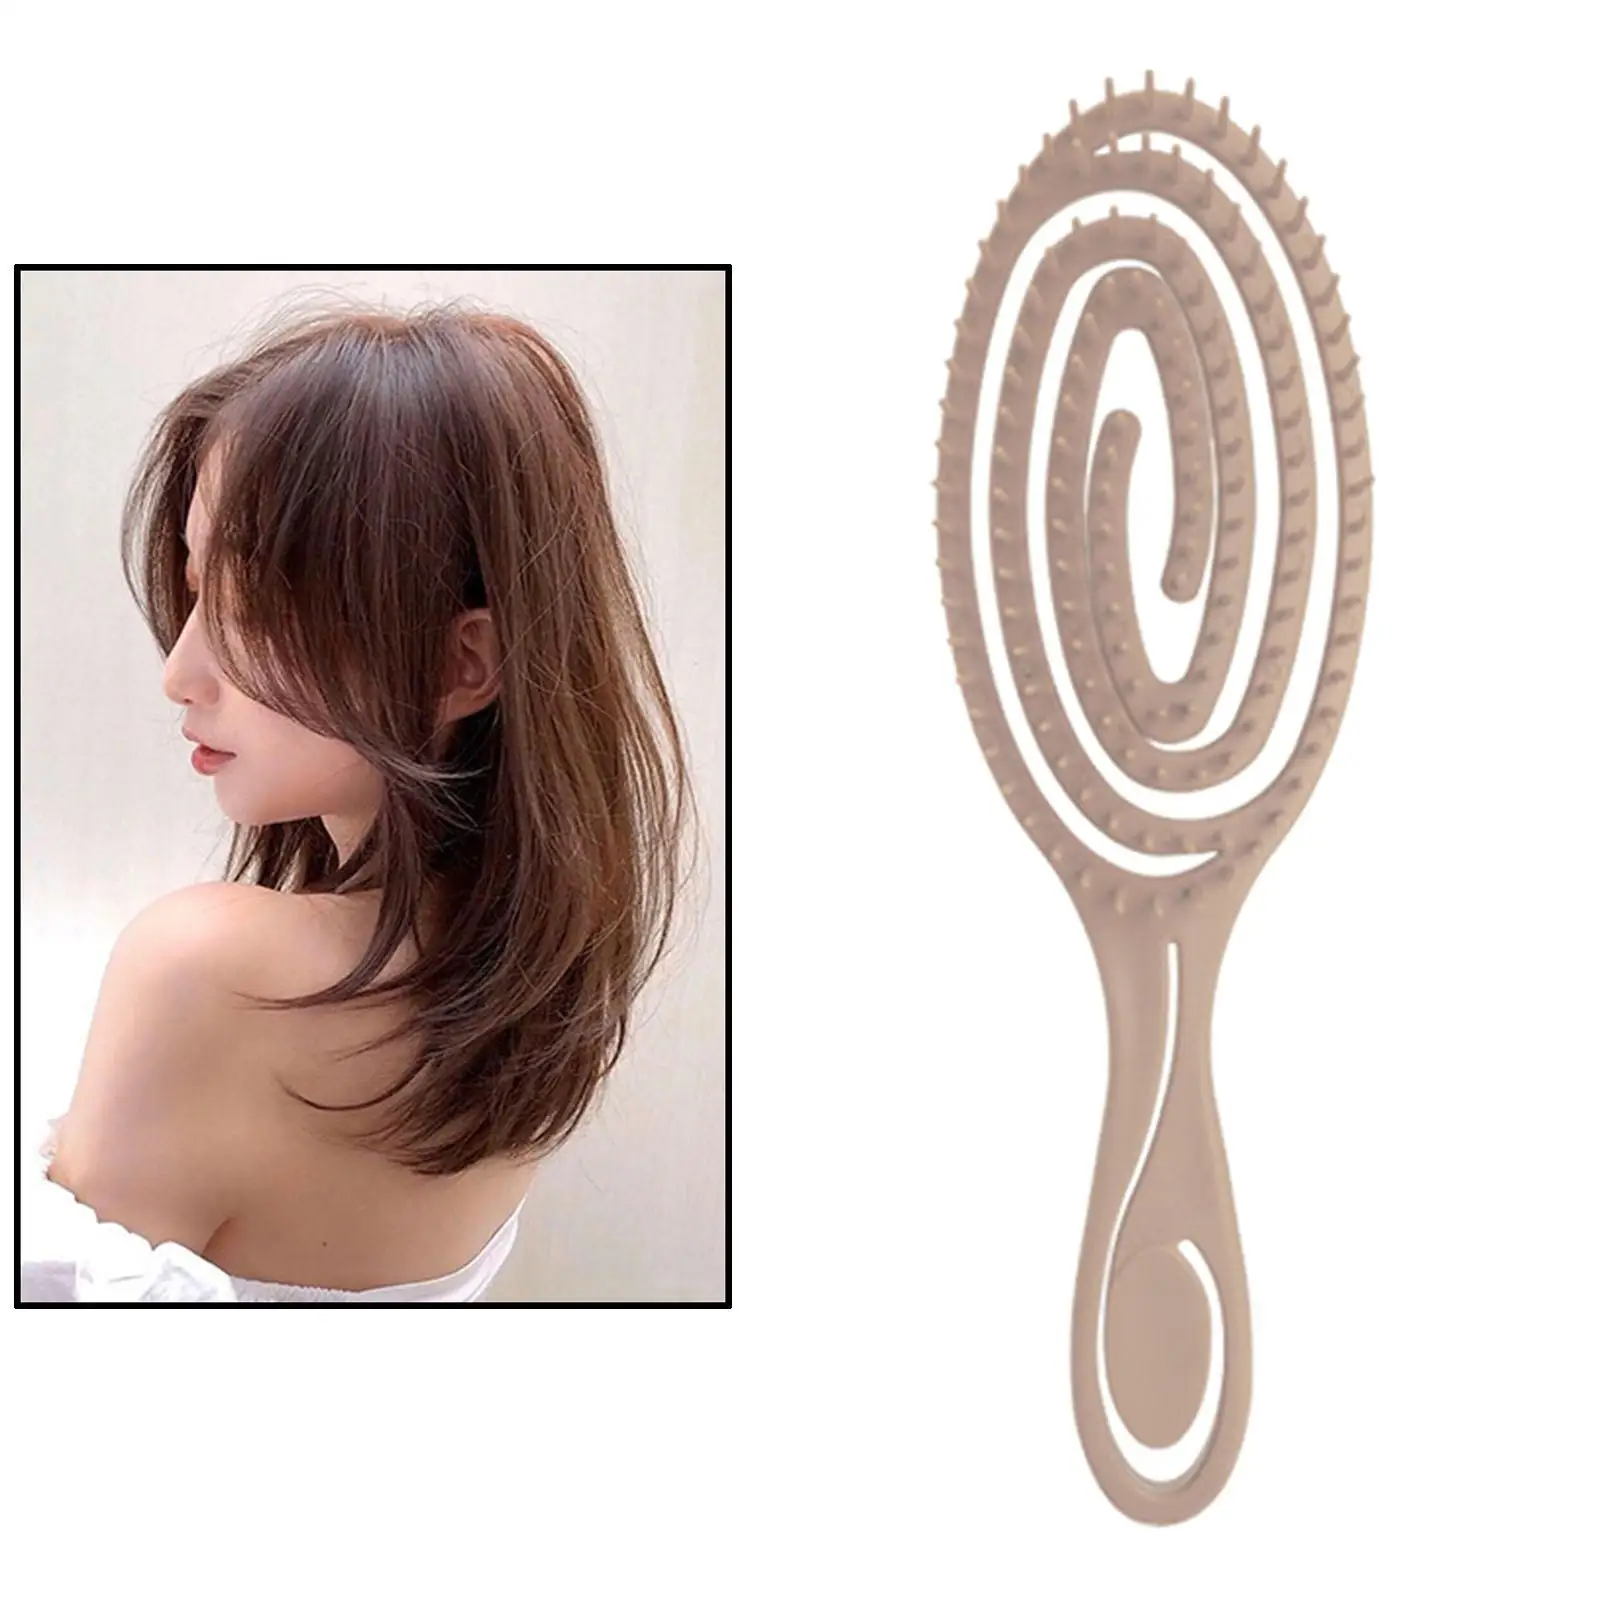 Curved Vented Styling Hair Brush Styling Tools Hair Brushes for Hairdressing